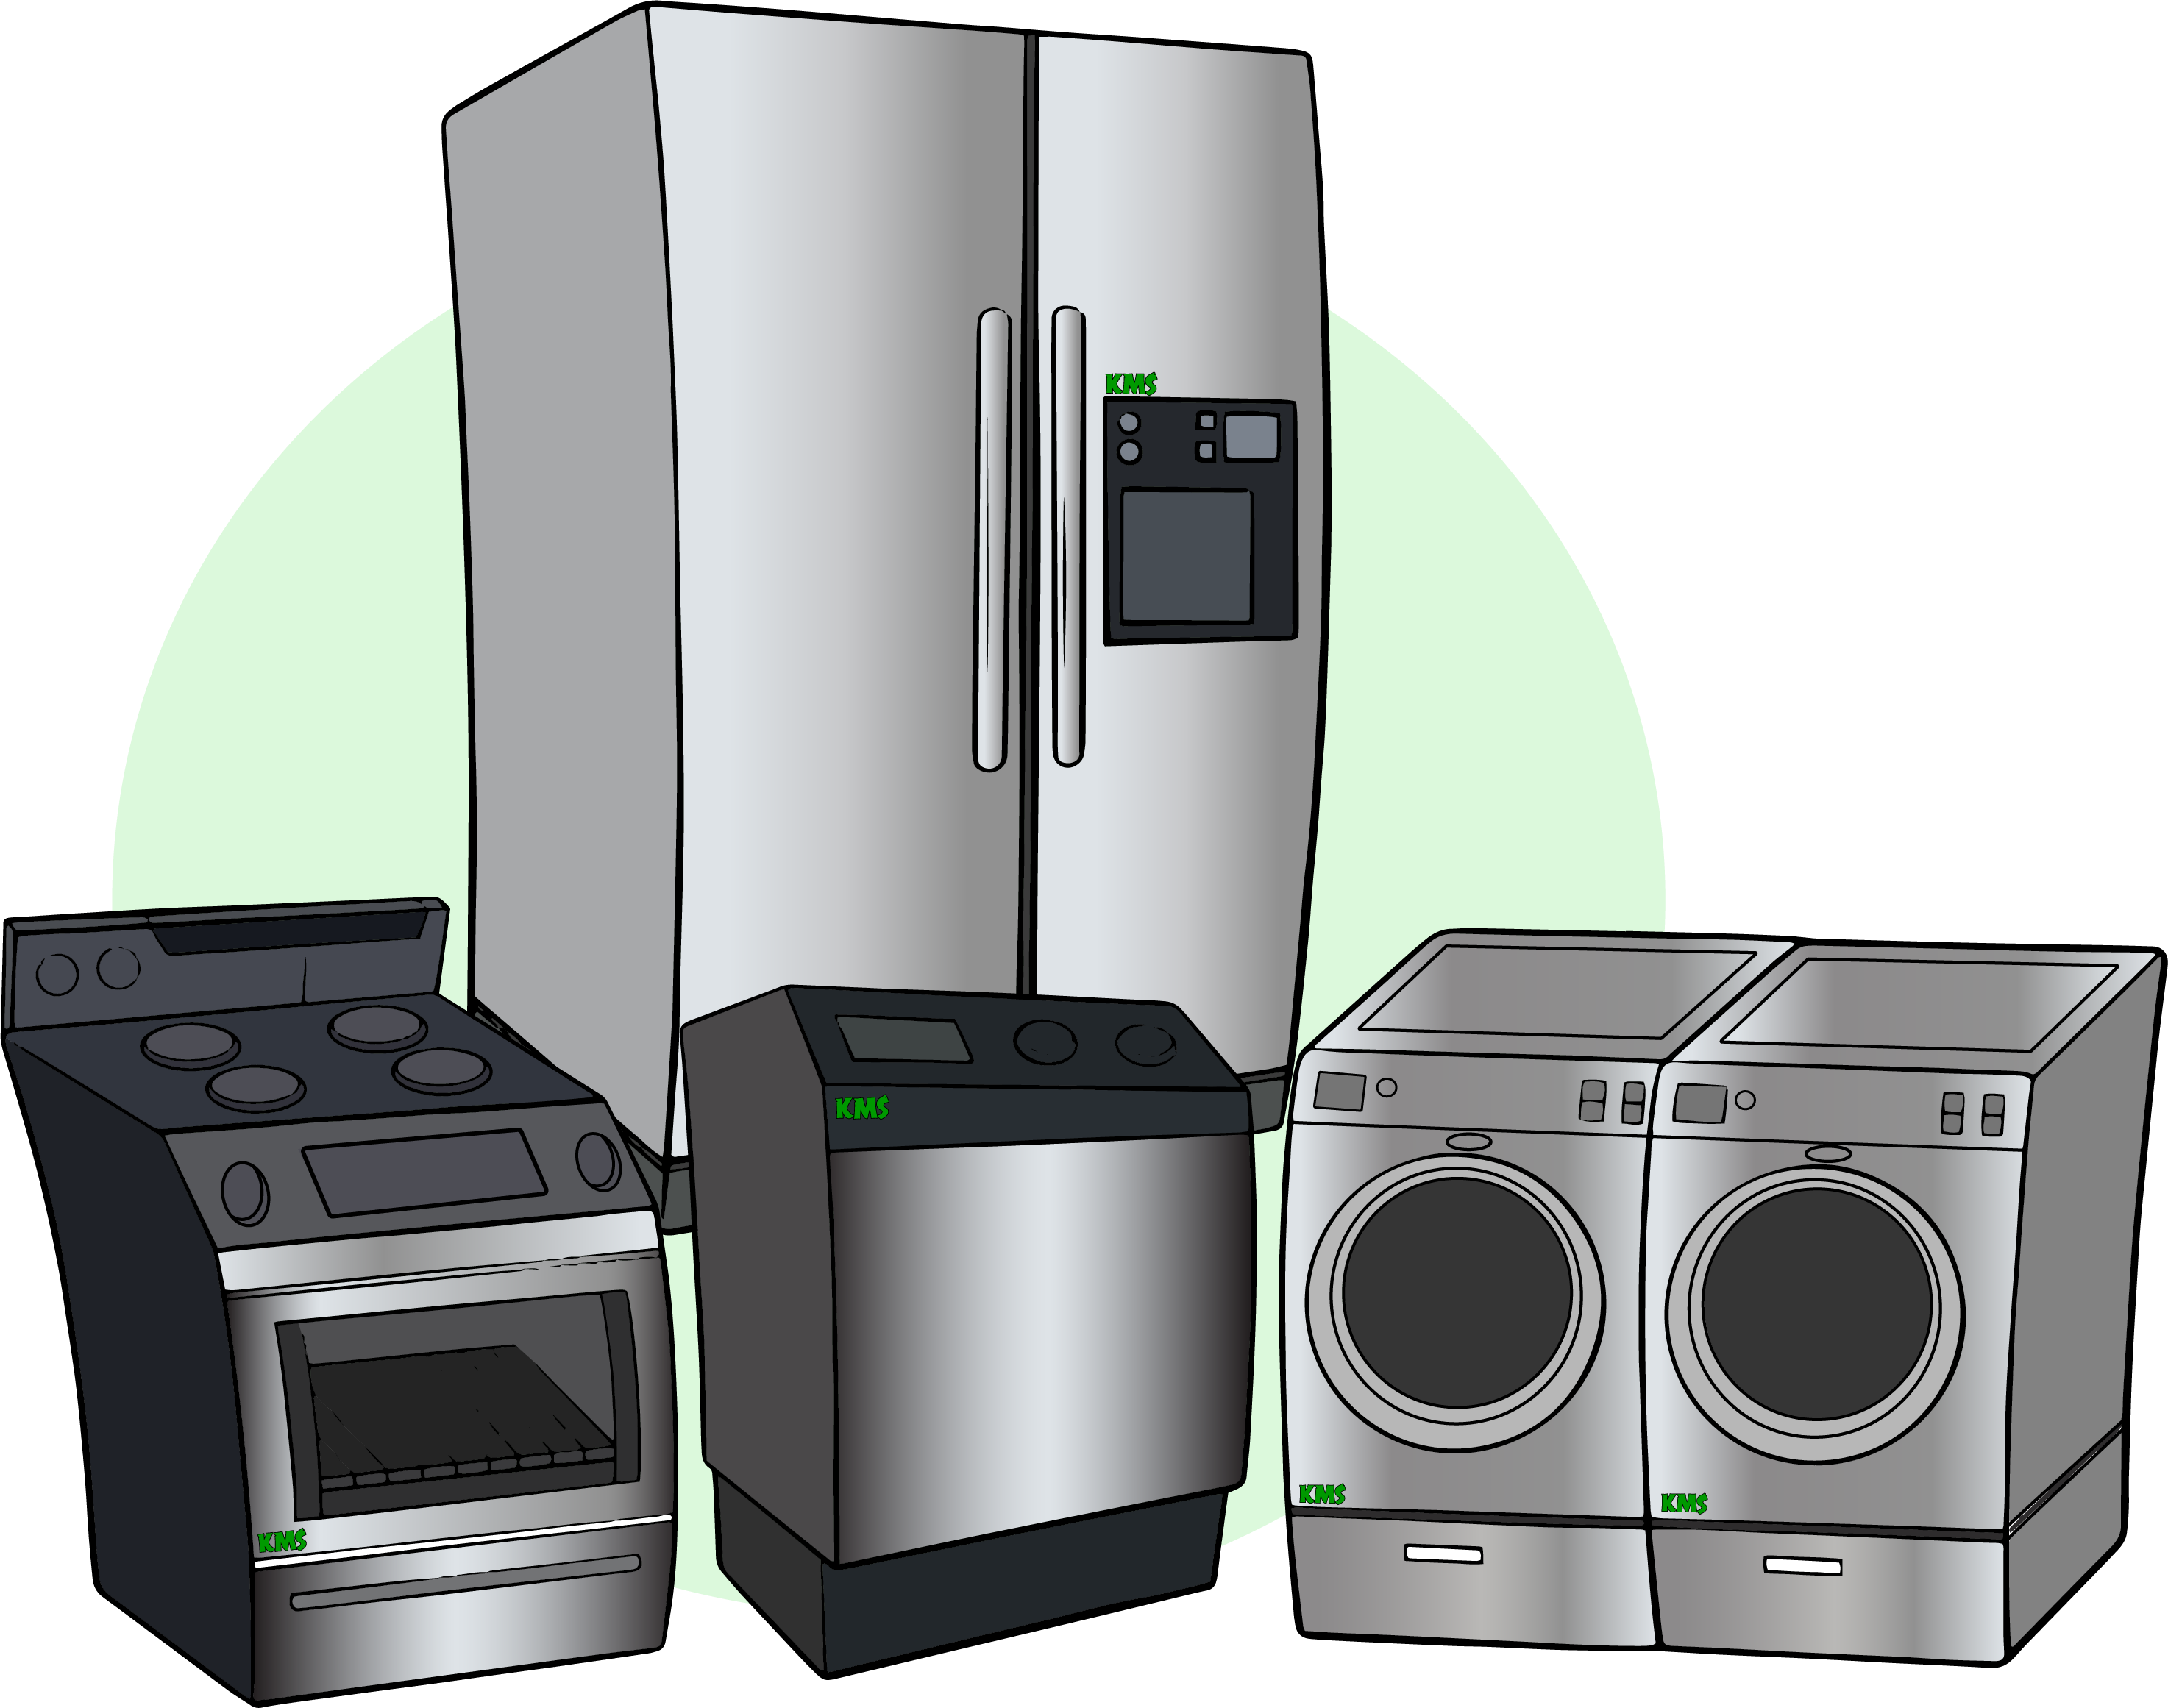 Frigidaire appliance repair service in montreal